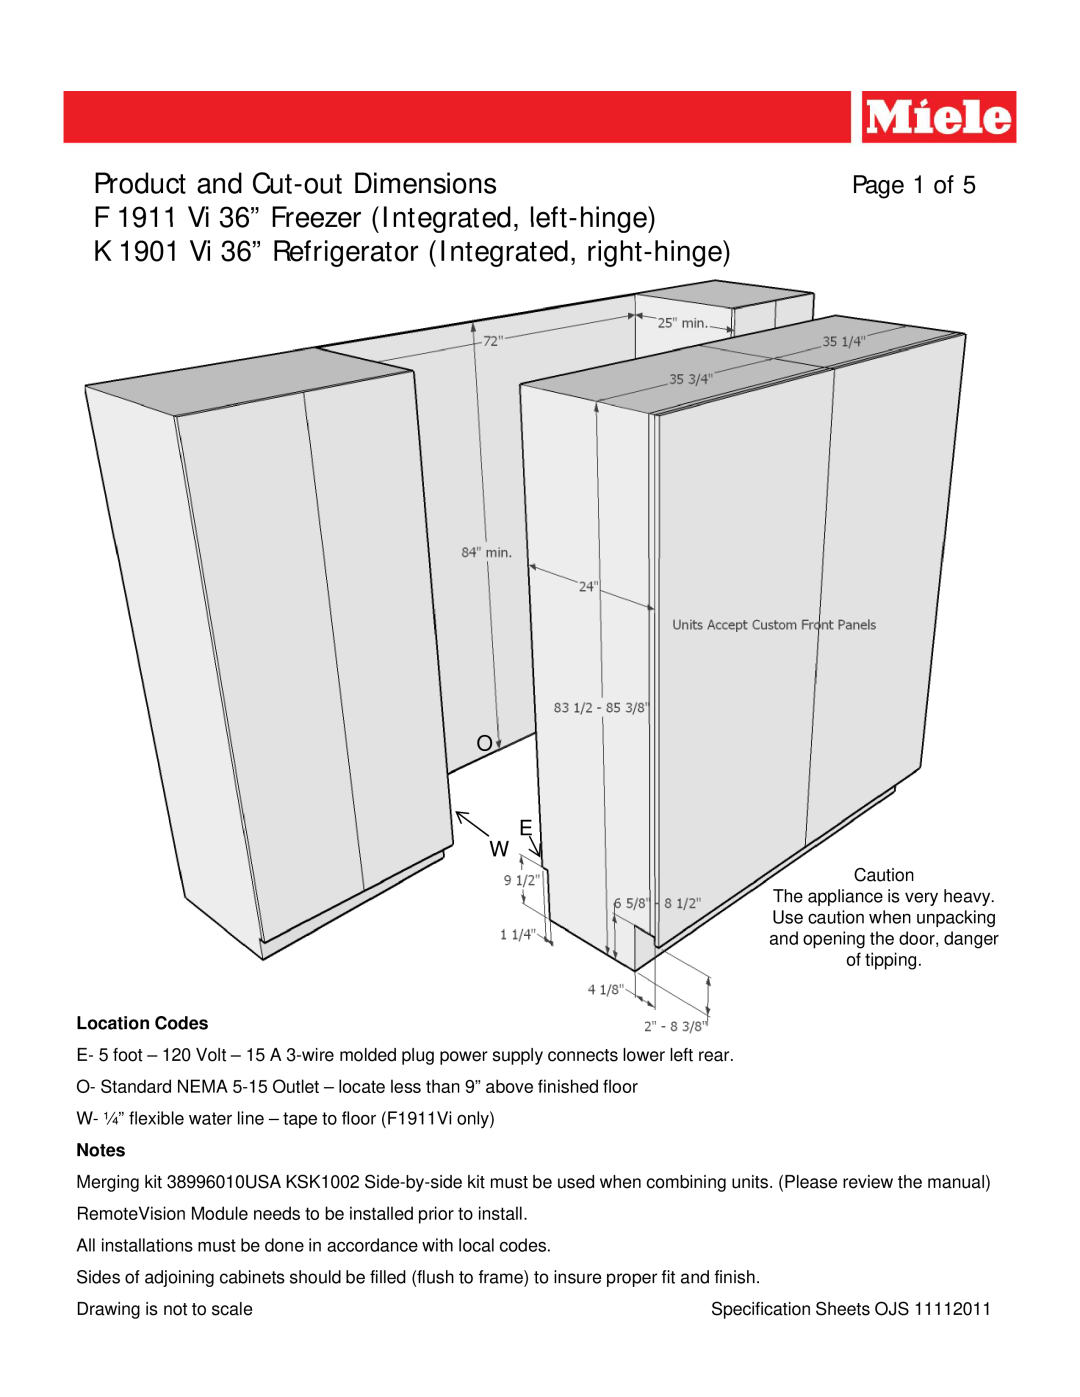 Miele K 1901 VI 36 dimensions Product and Cut-outDimensions, F 1911 Vi 36” Freezer Integrated, left-hinge, Page 1 of 